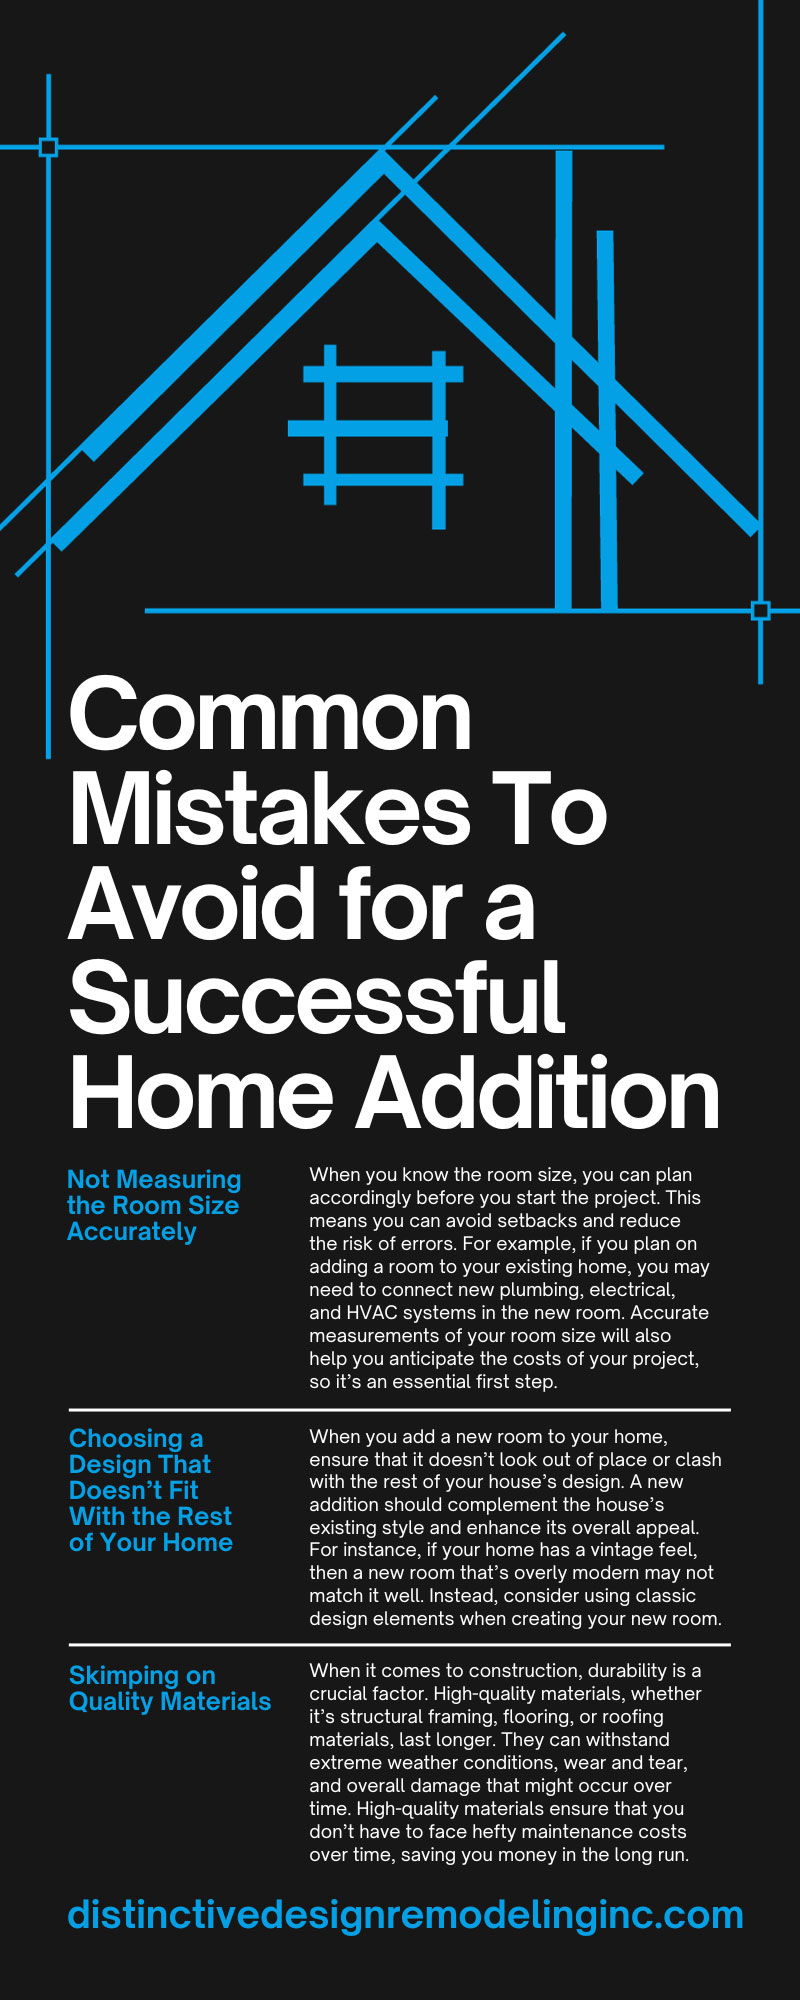 Common Mistakes To Avoid for a Successful Home Addition